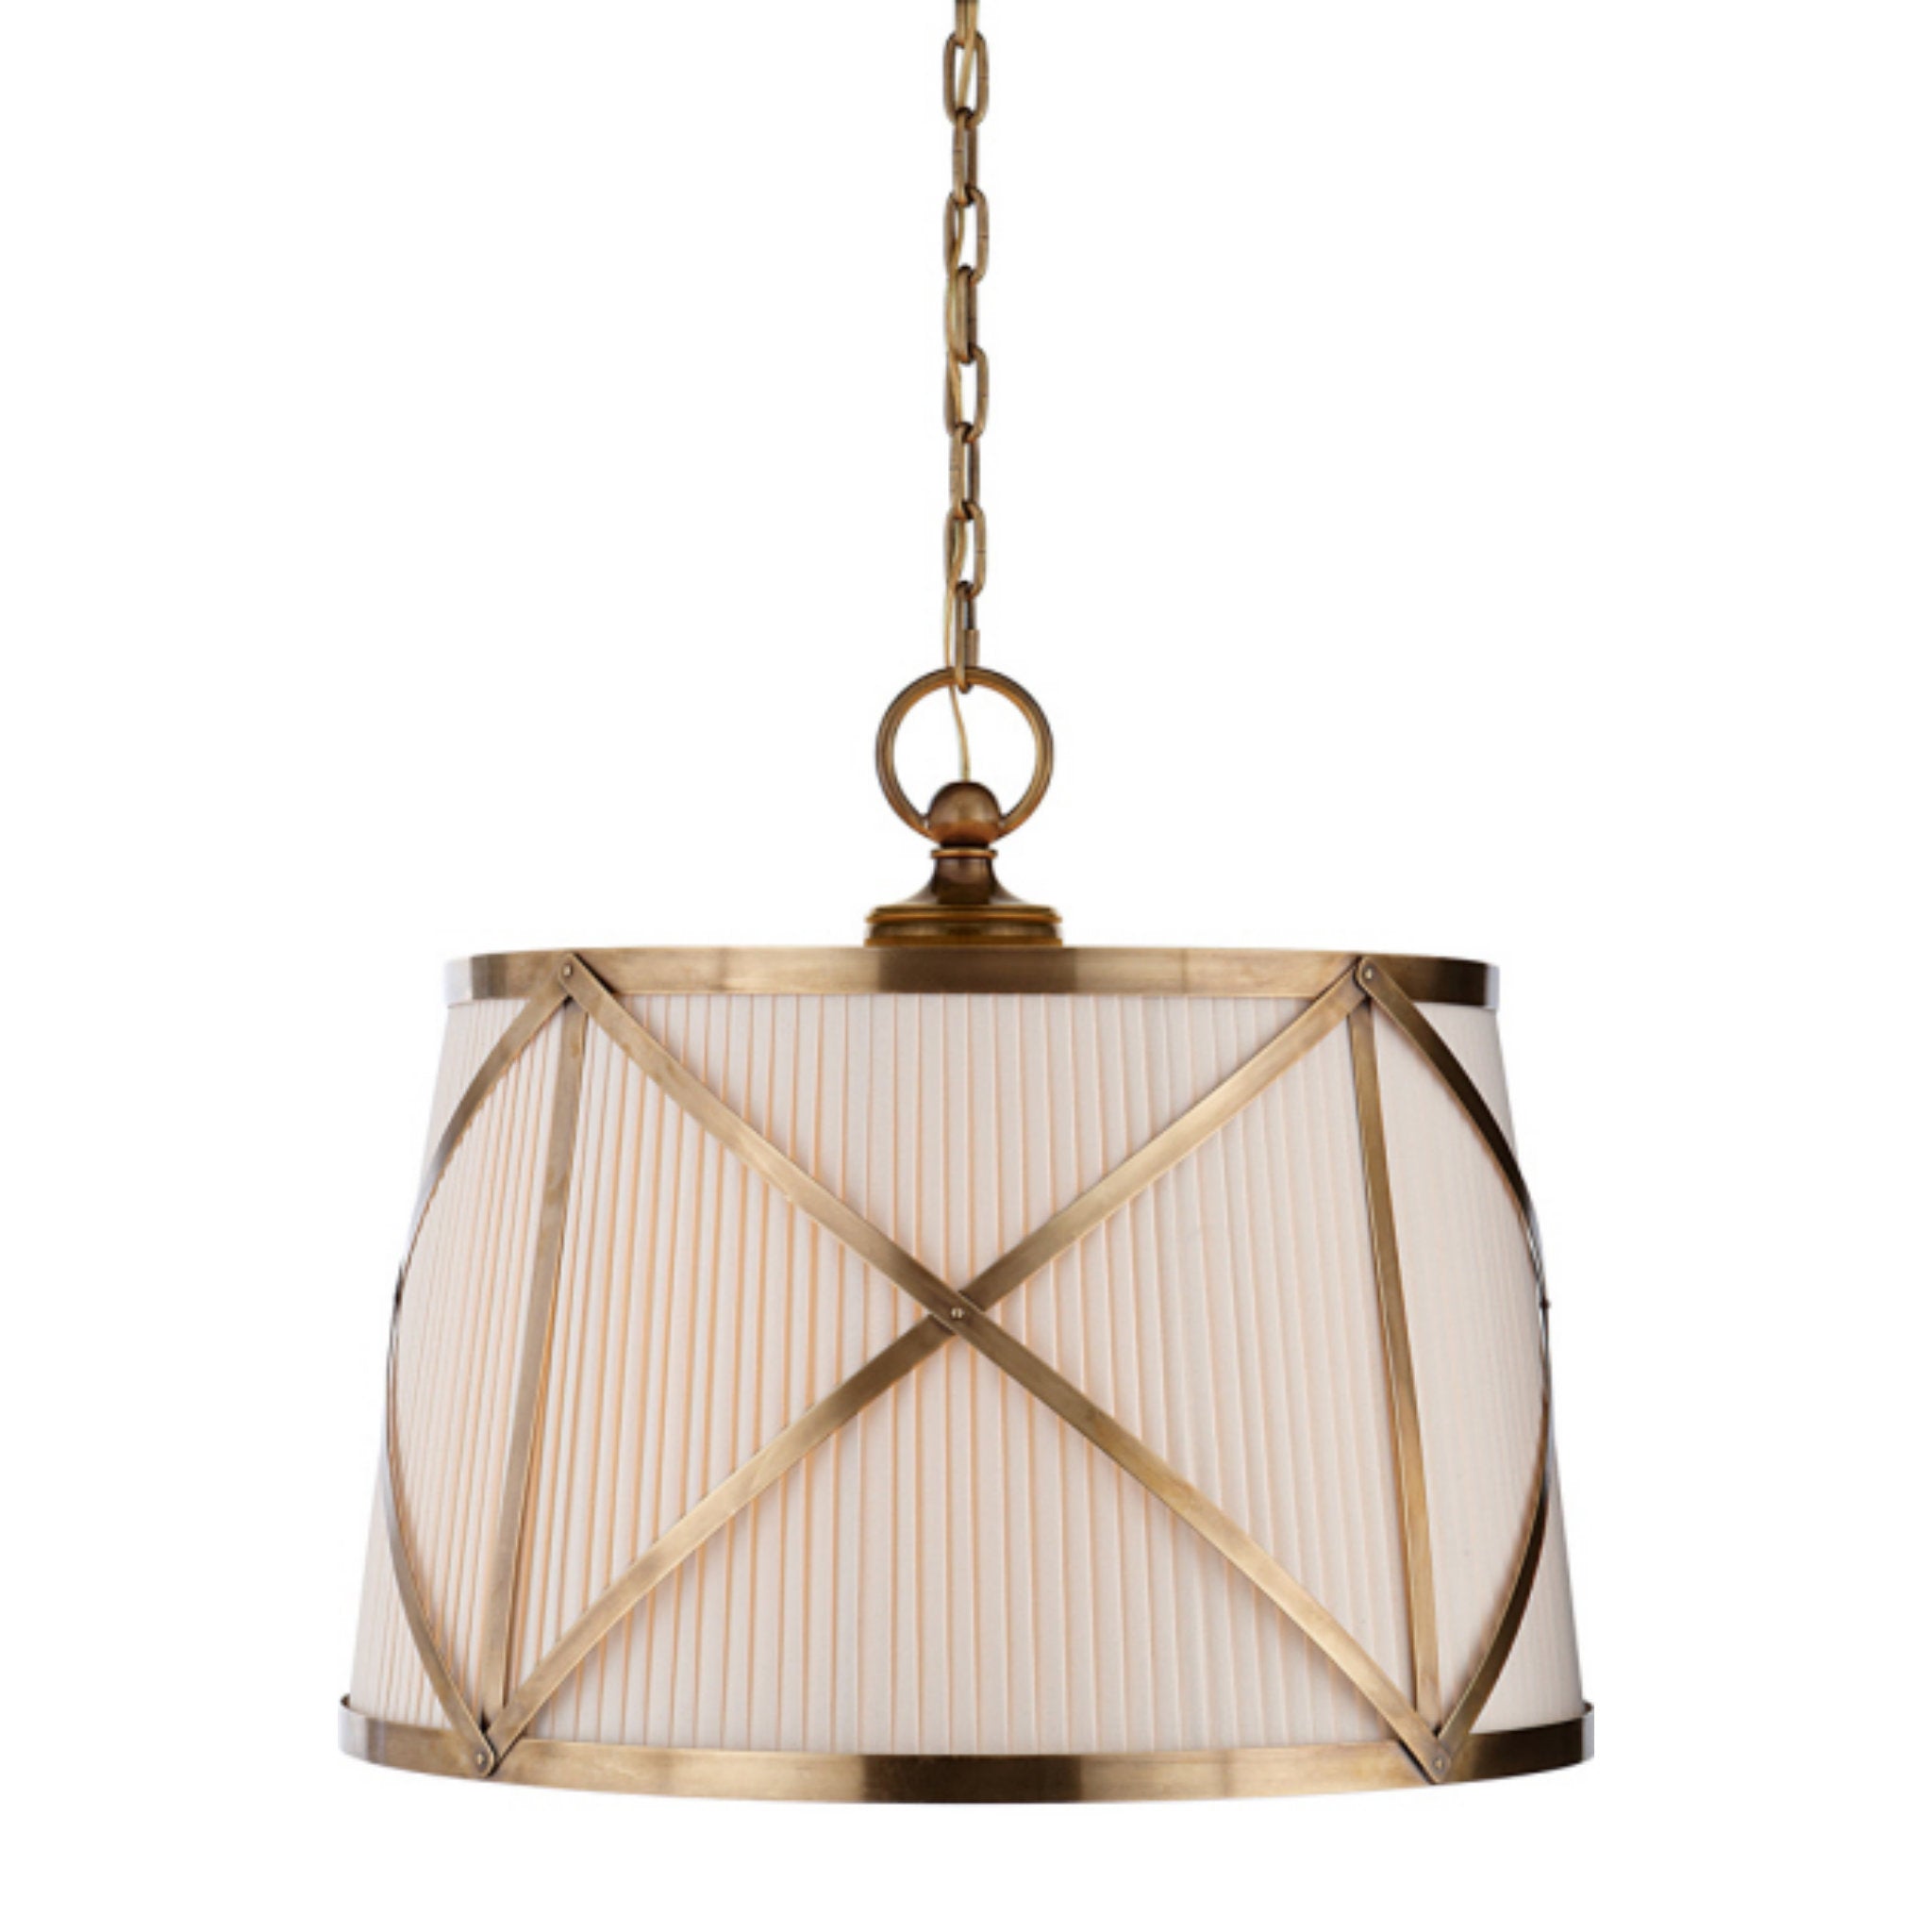 Chapman & Myers Sloane Single Shop Light in Antique-Burnished Brass wi